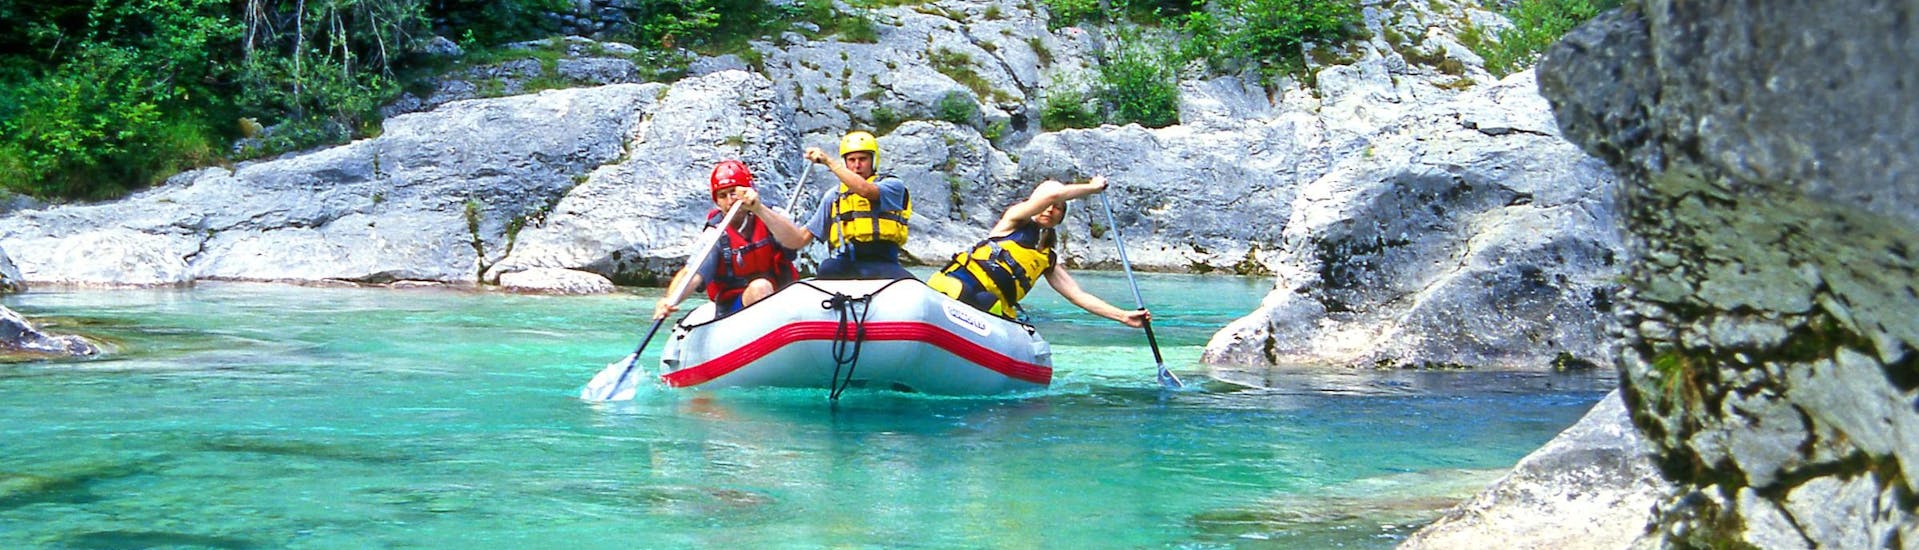 A group of young people enjoying some white water rafting fun in the rafting & canyoning hotspot of Fratarca.